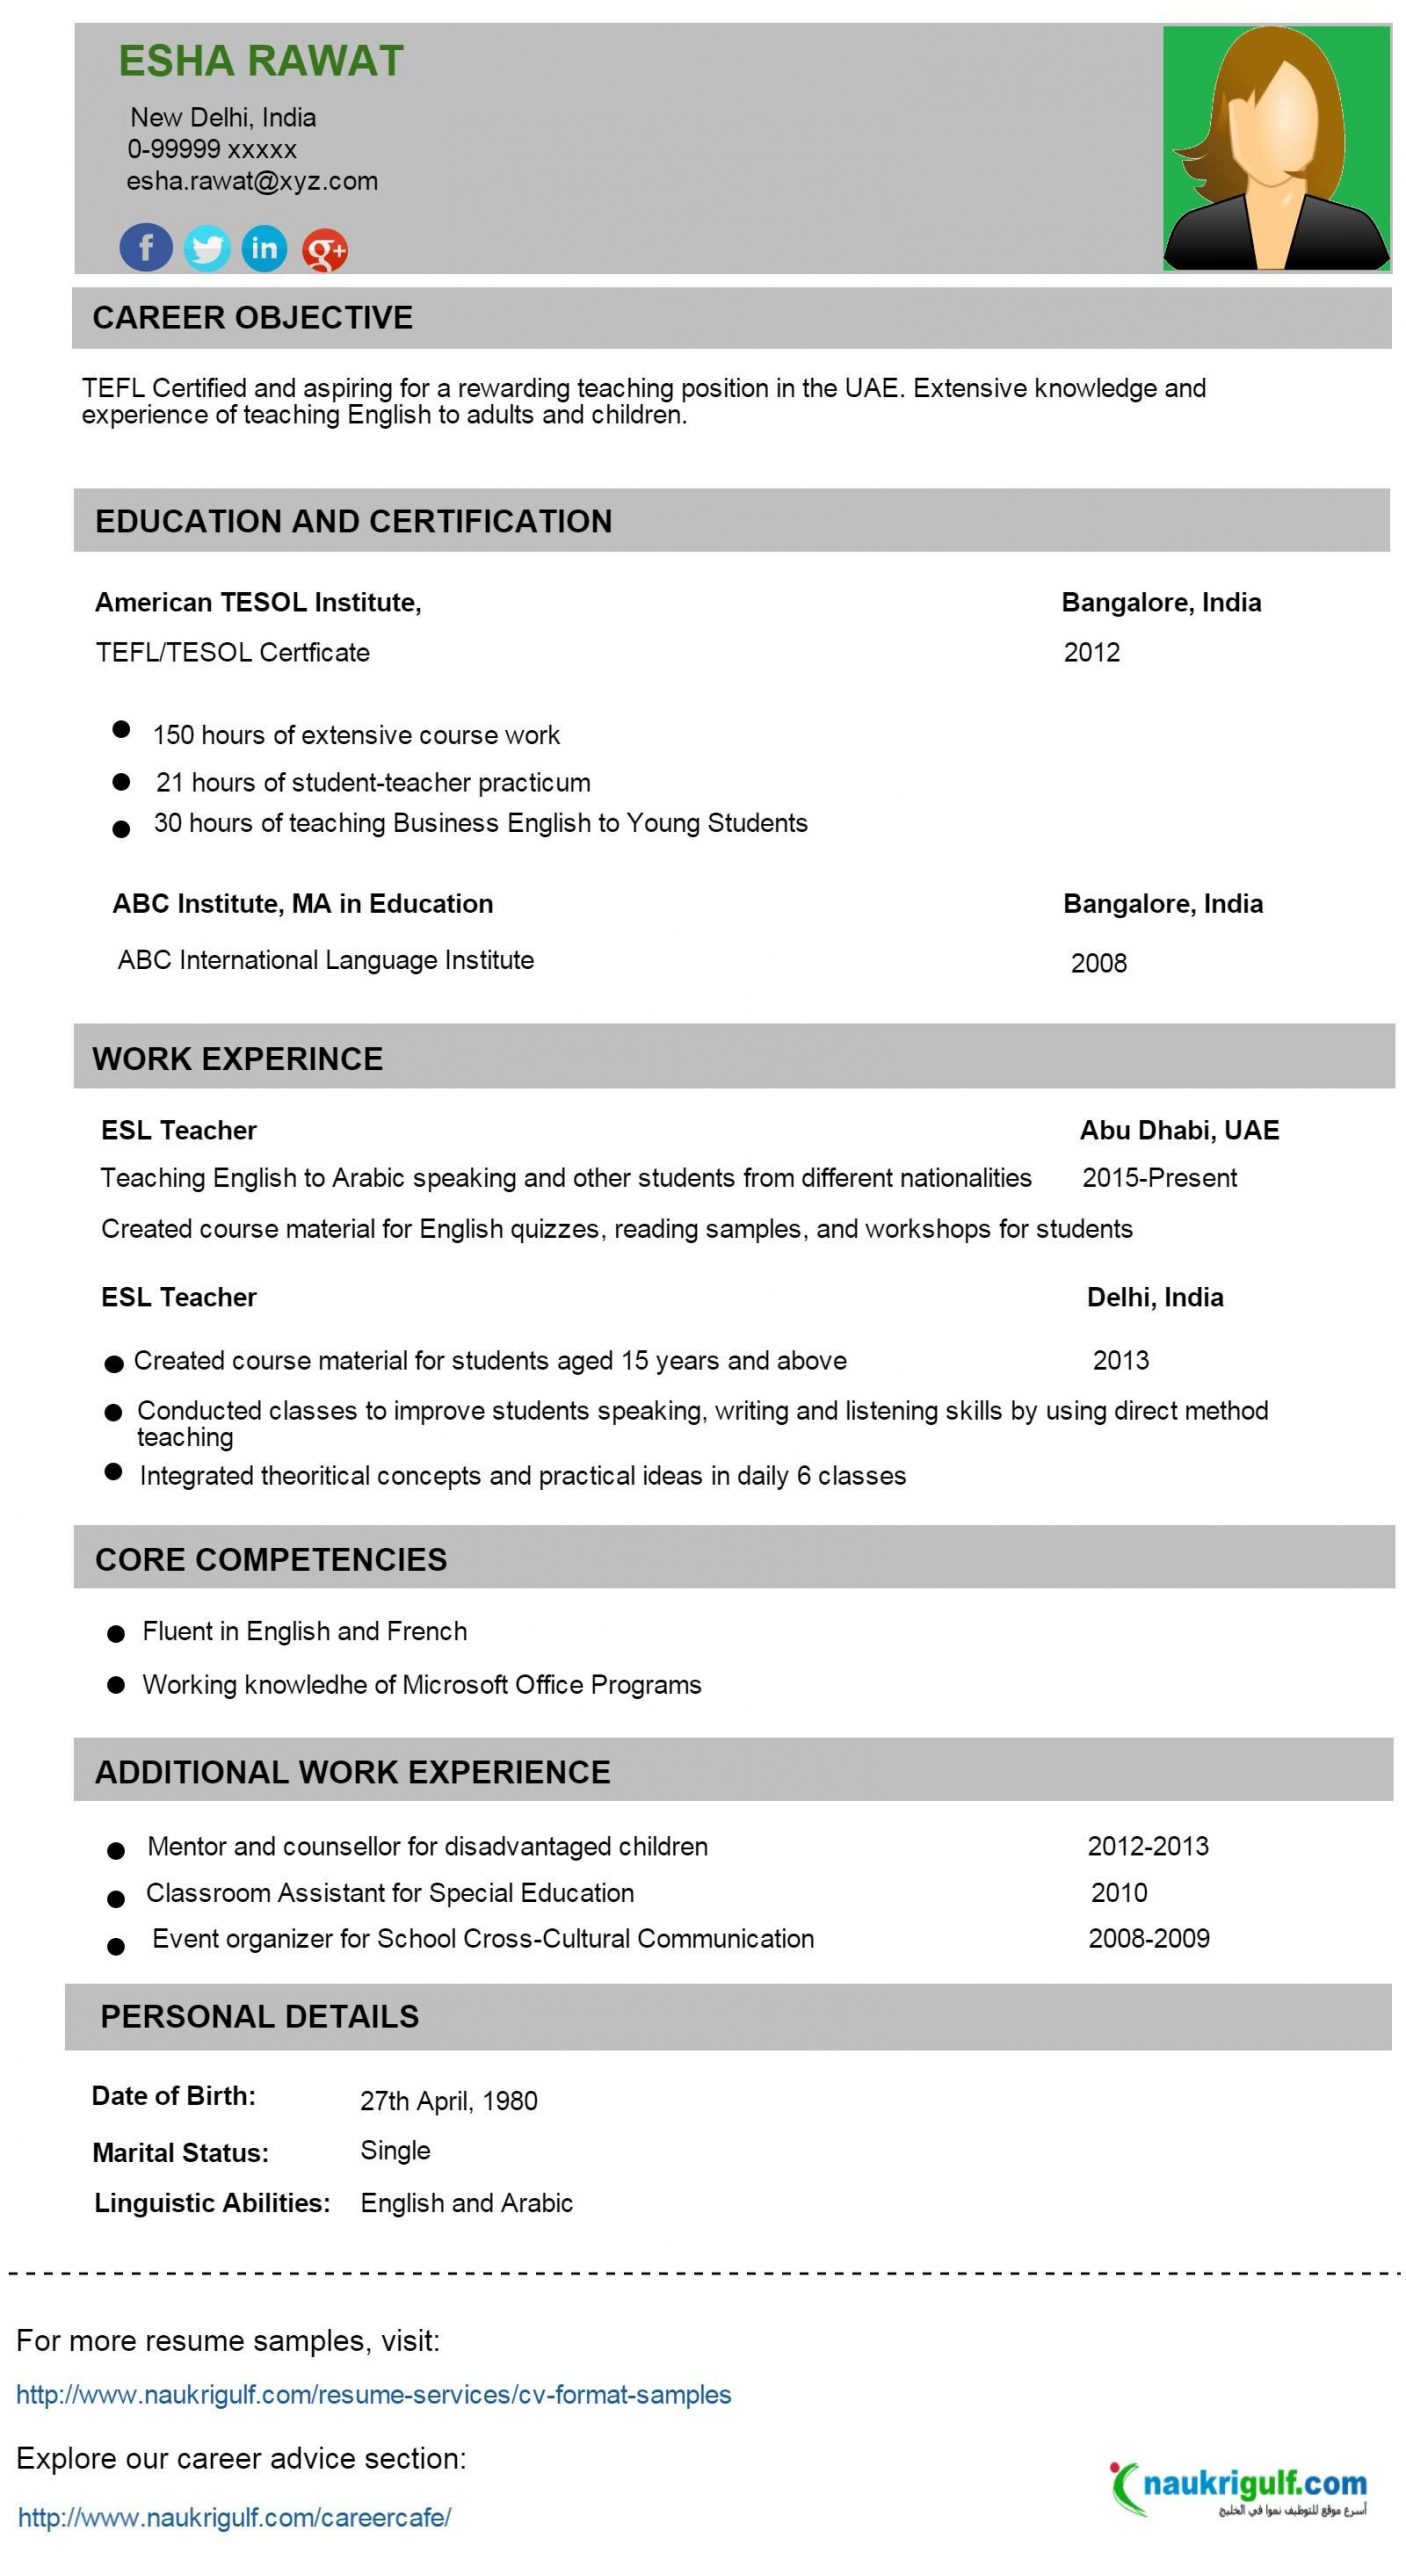 Teaching abroad requires you to create a perfect CV that